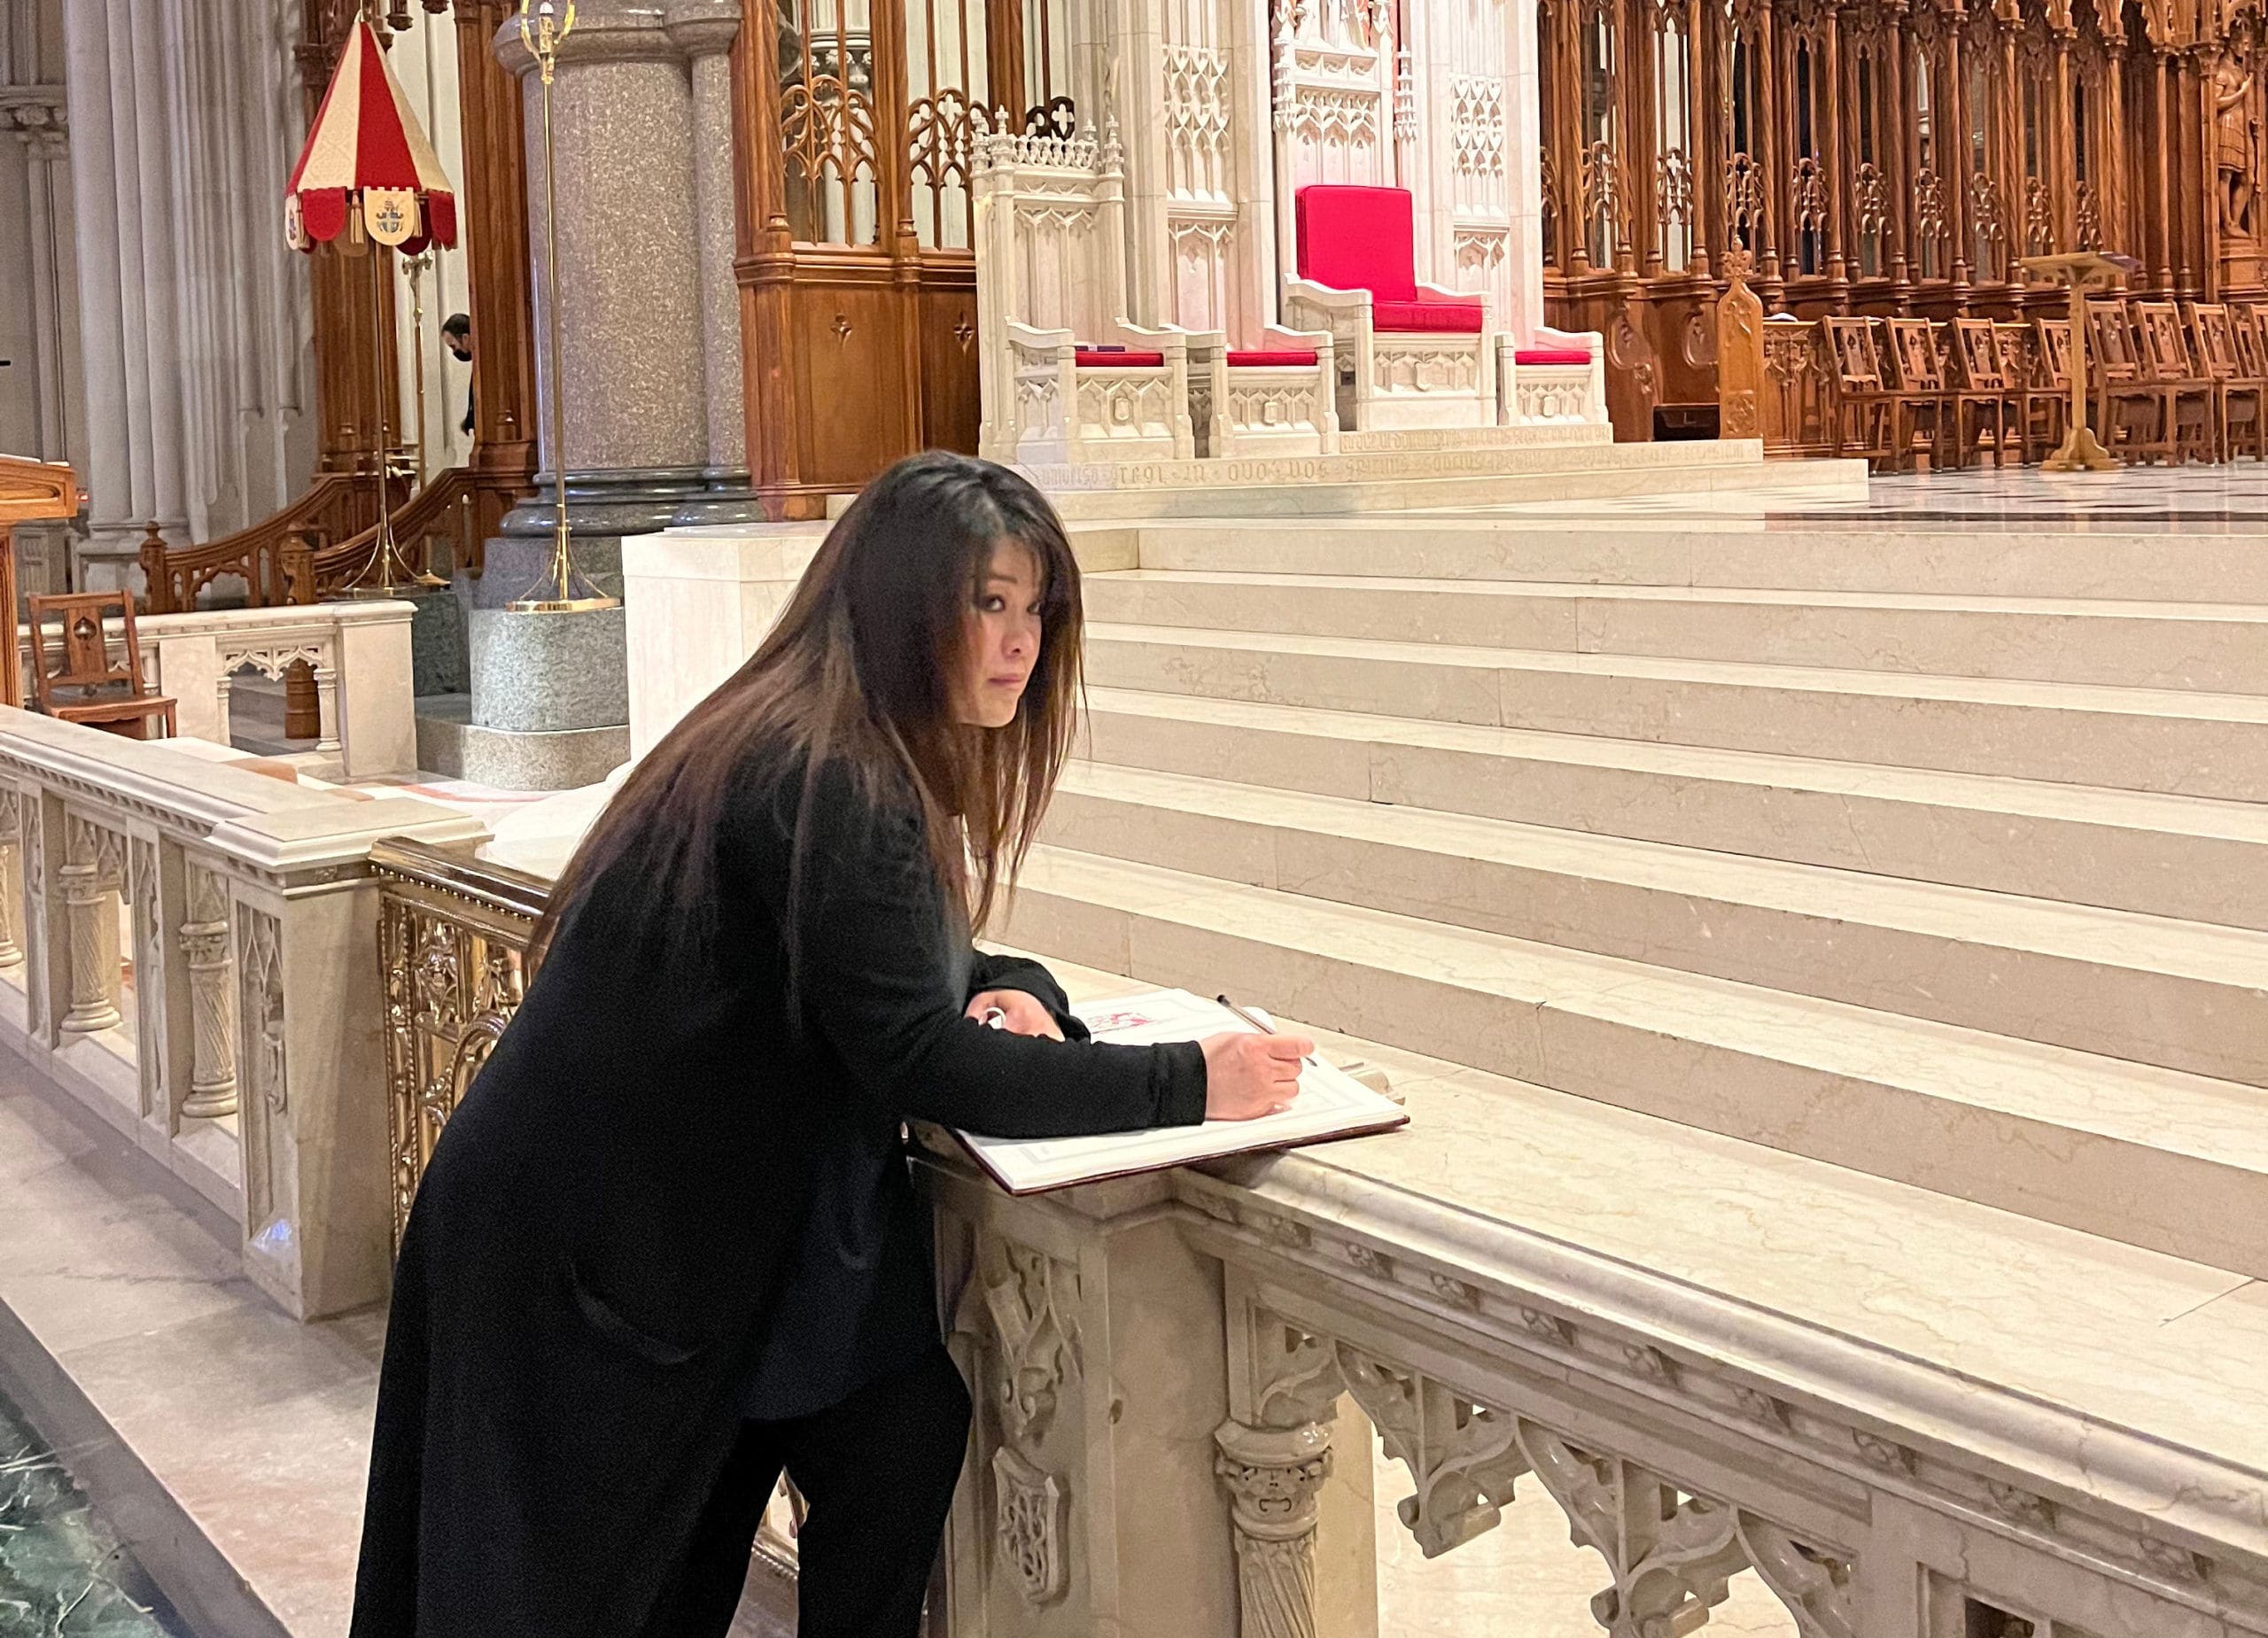 Thuy Vuong is preparing to receive the sacraments of initiation at St. Joseph of the Palisades Parish in West New York. Vuong recently participated in the Rite of Election at the Cathedral Basilica of the Sacred Heart in Newark. (Photo: Archdiocese of Newark/Marco Guerrero)